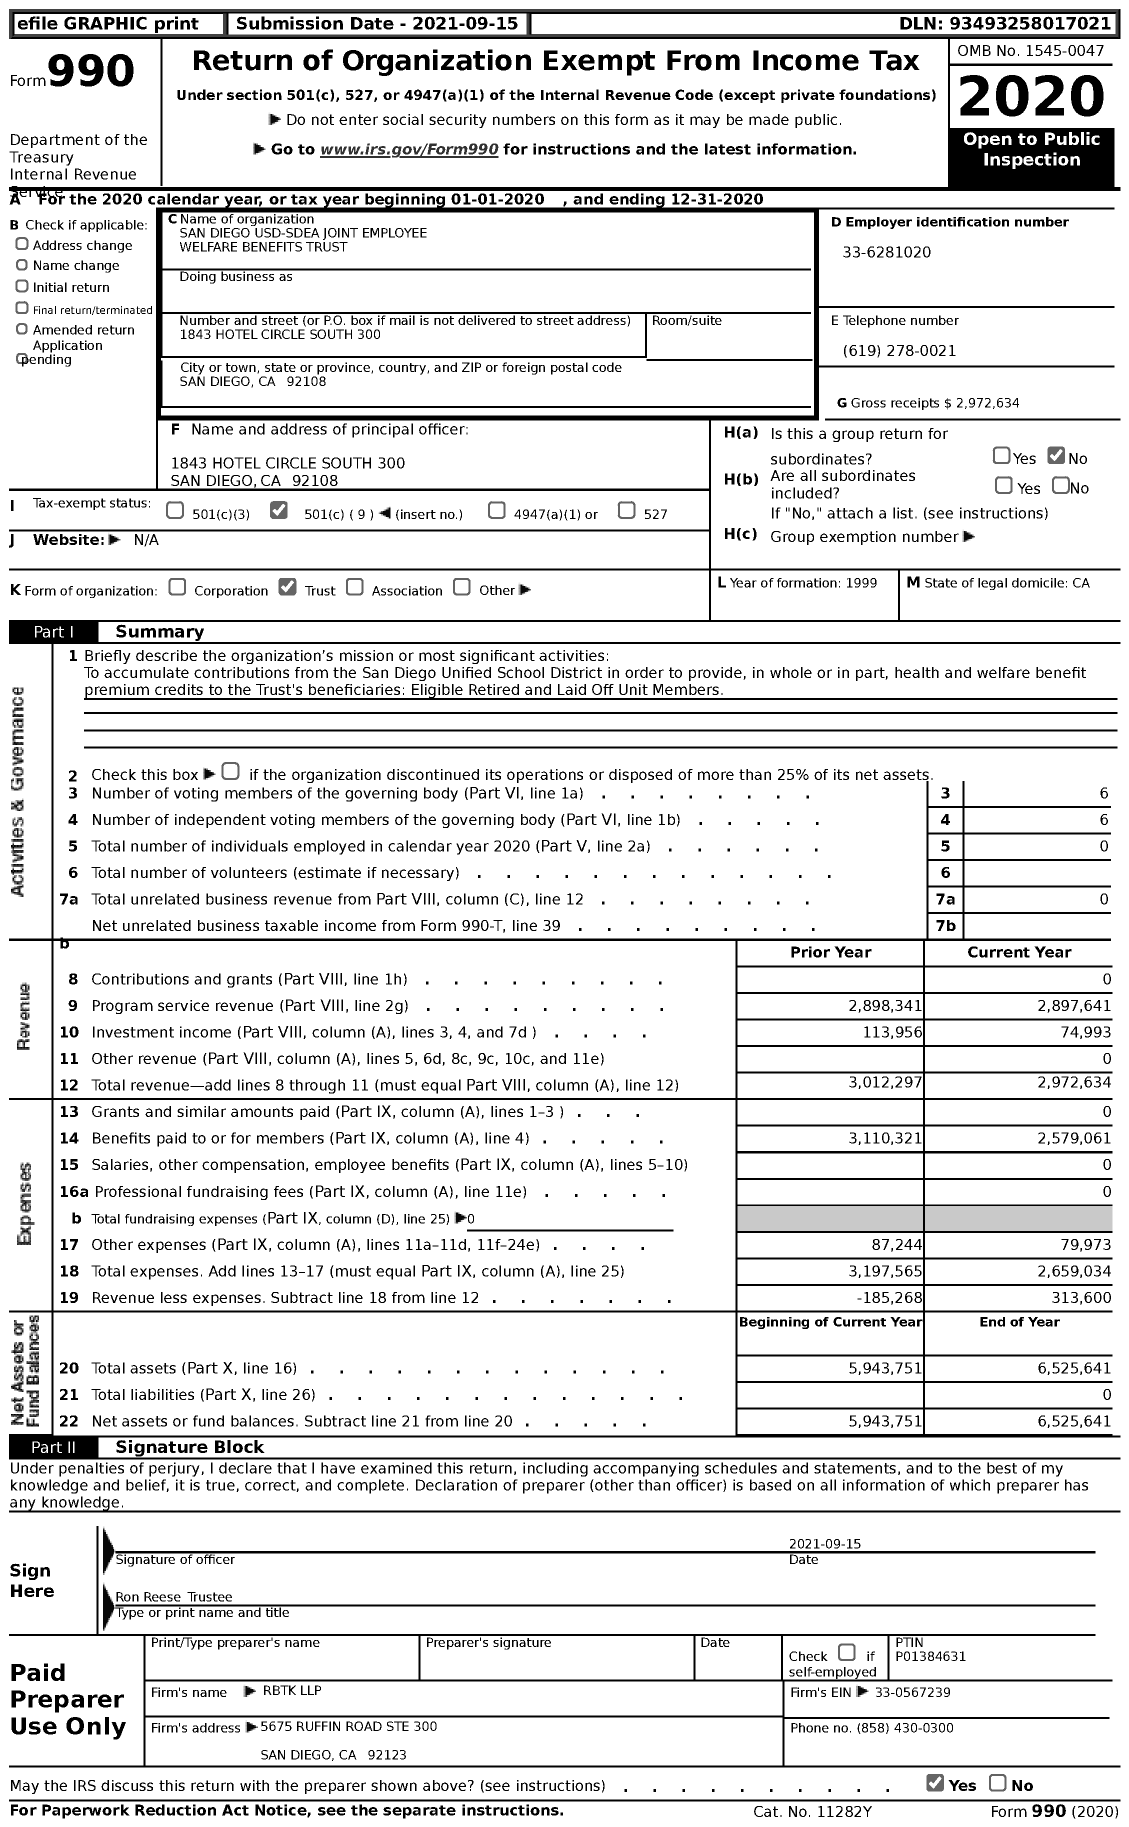 Image of first page of 2020 Form 990 for San Diego Usd-Sdea Joint Employee Welfare Benefits Trust